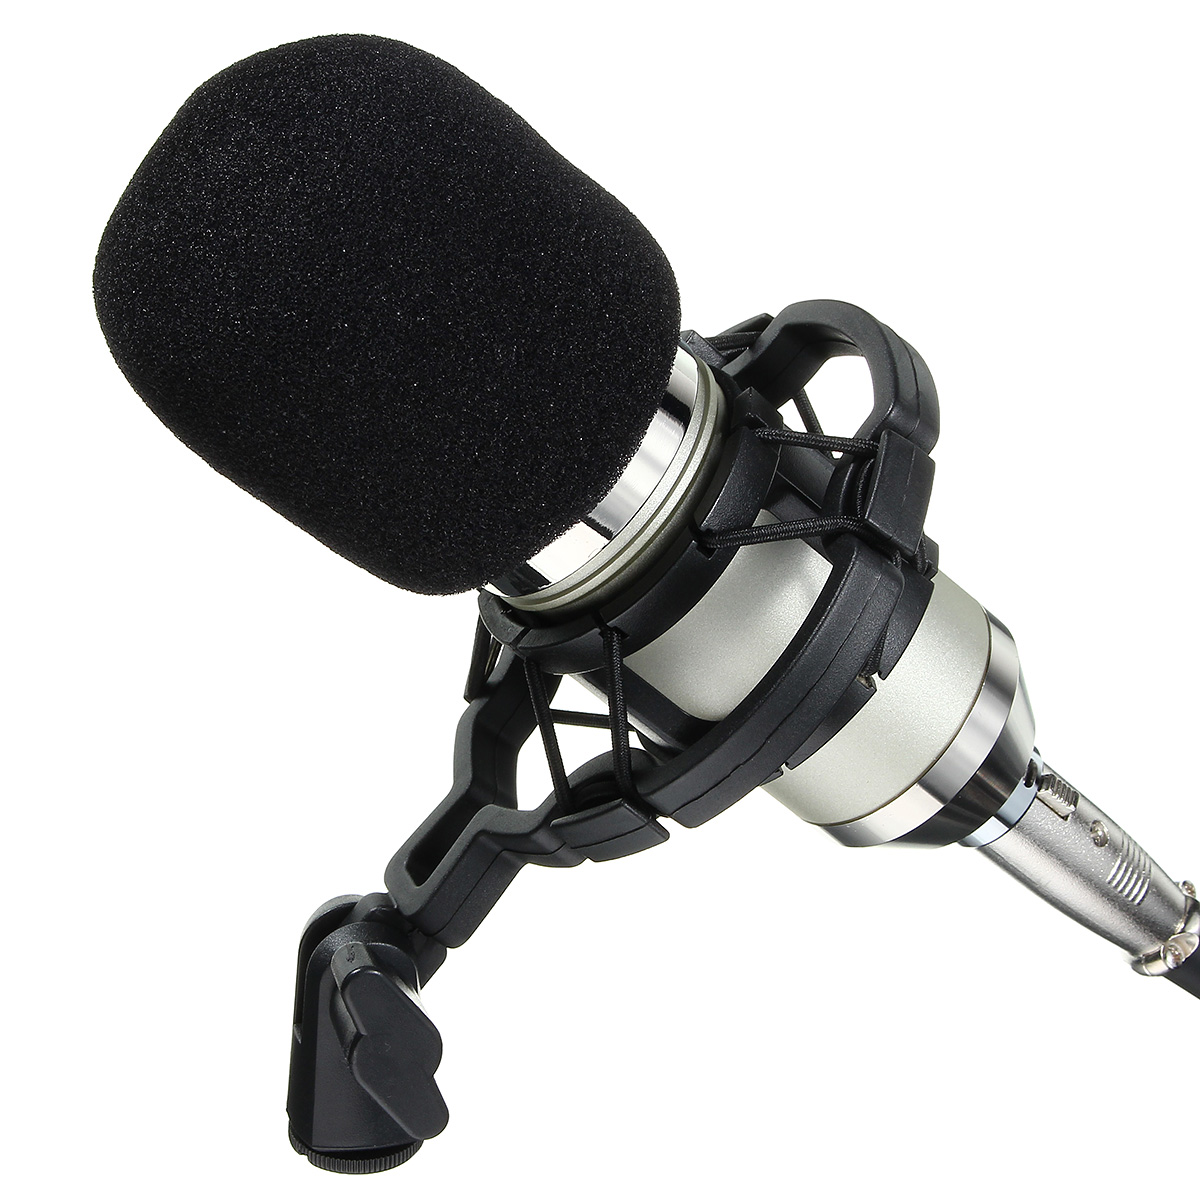 

BM800 Red Silver Sound Studio Recording Dynamic Condenser Microphone Mic Kit With Shock Mount